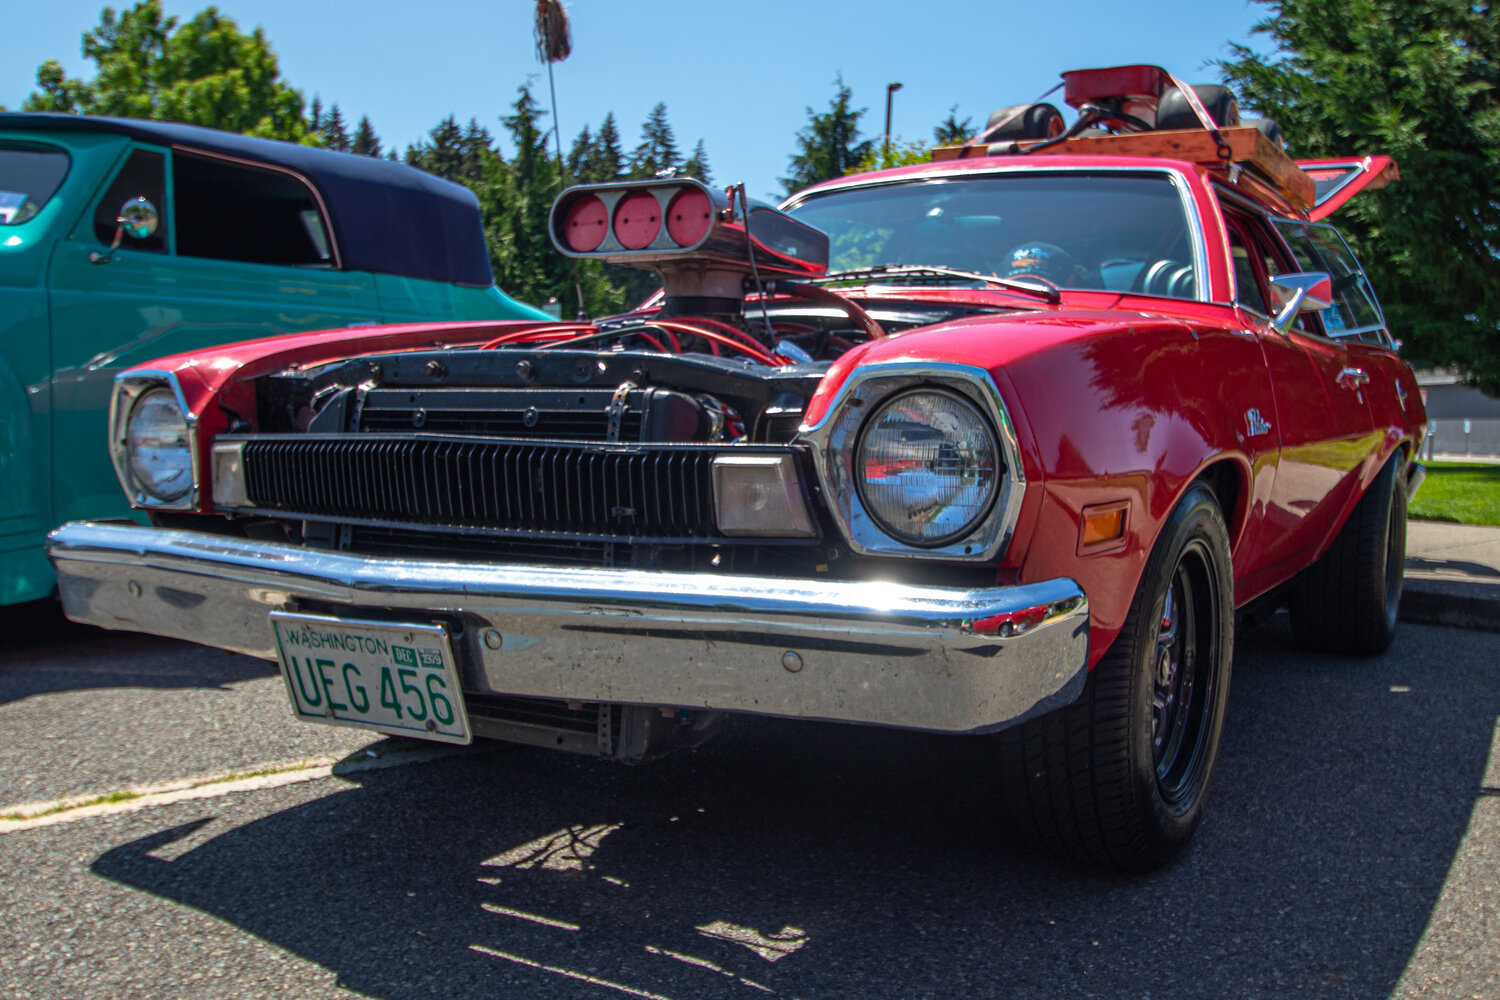 Patrick Nerney's 1976 Ford Pinto Wagon sits on display at the Yelm High School car show on Sunday, June 4.